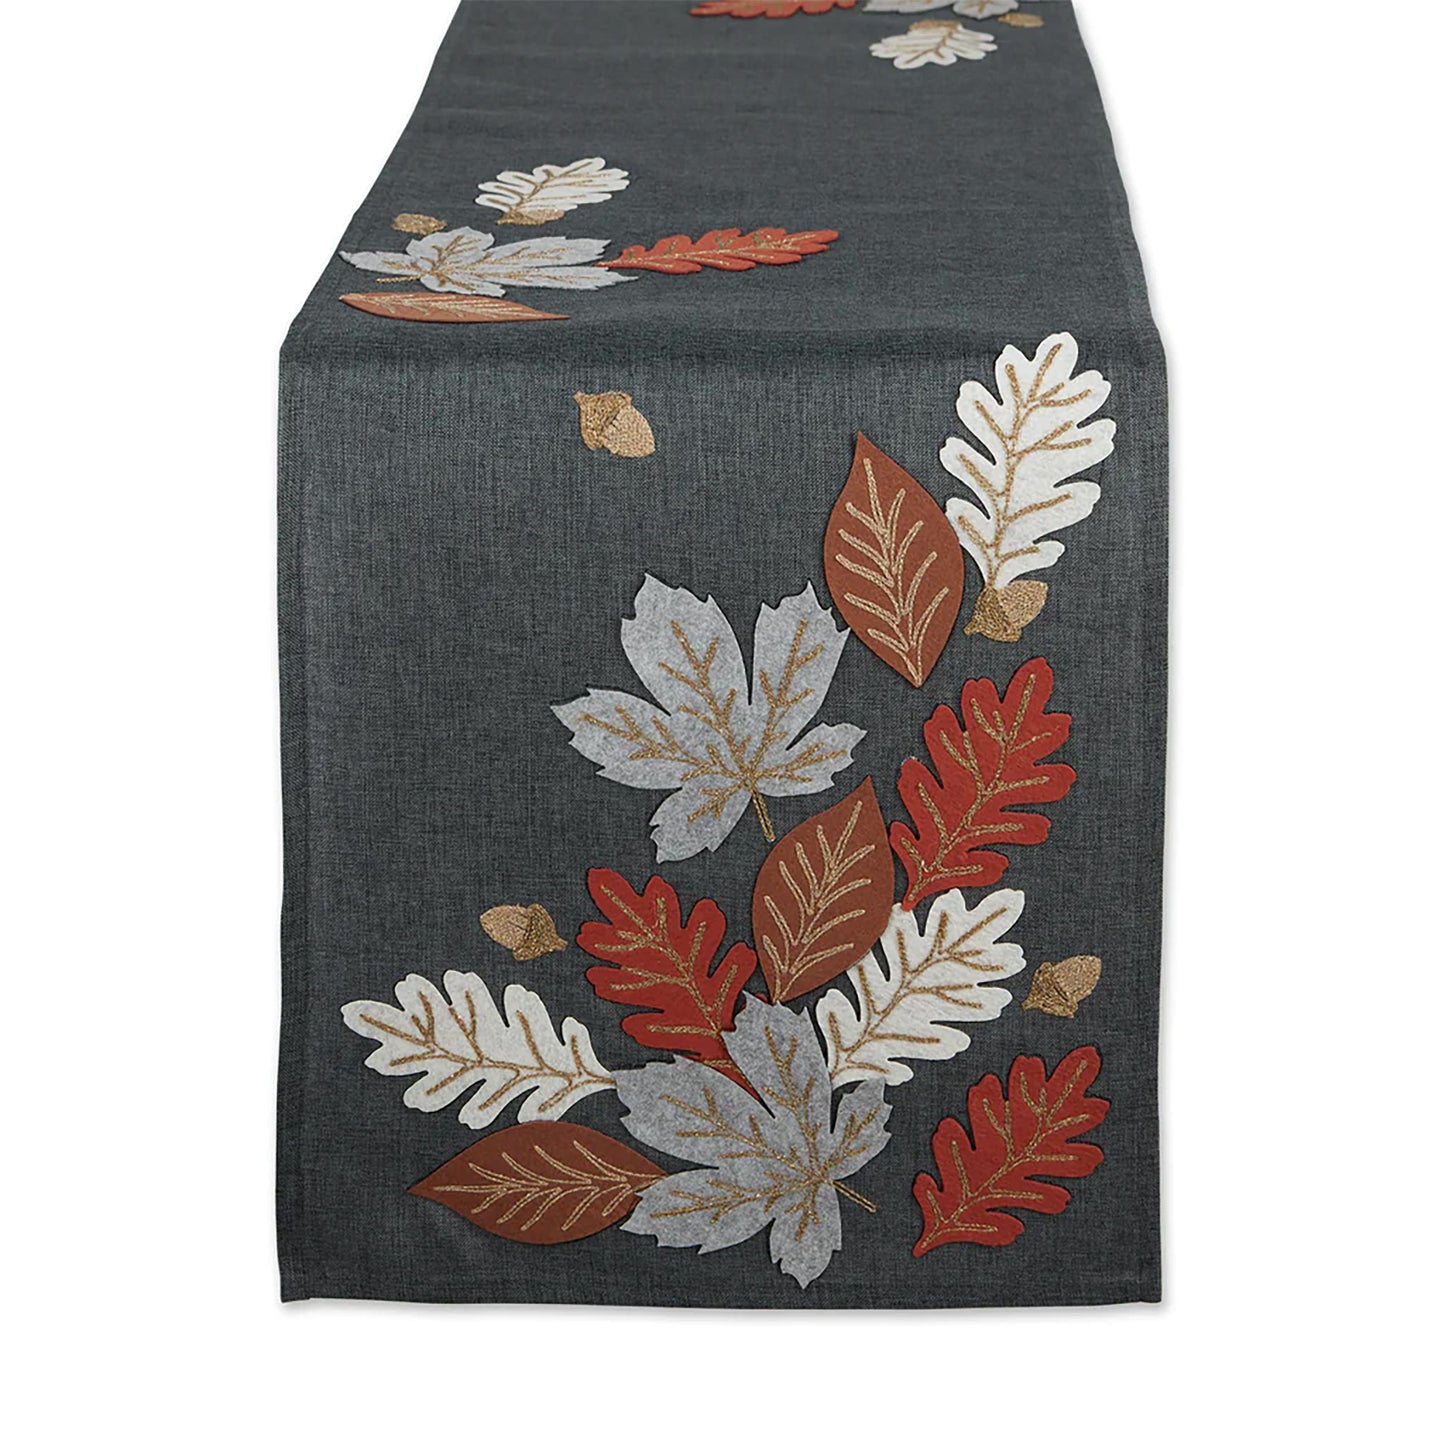 Autumn Leaves Appliqued Embroidered Runner